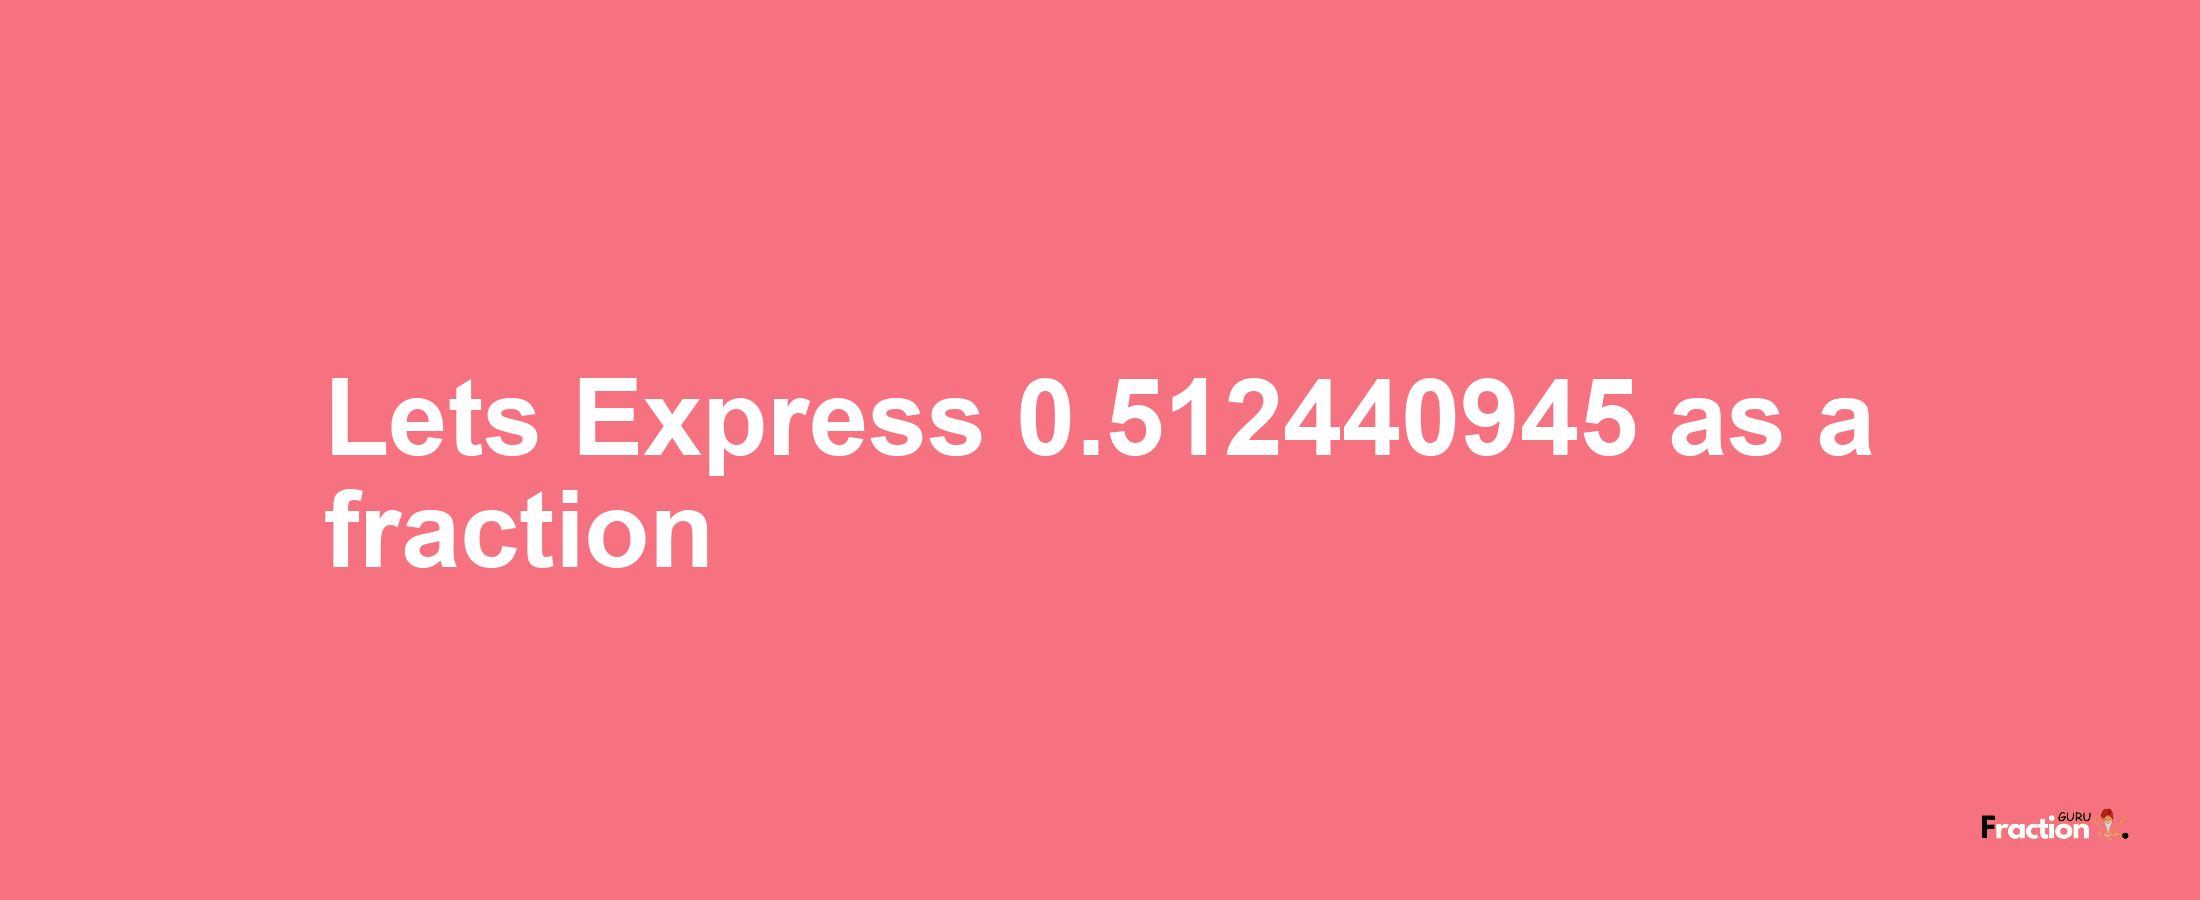 Lets Express 0.512440945 as afraction